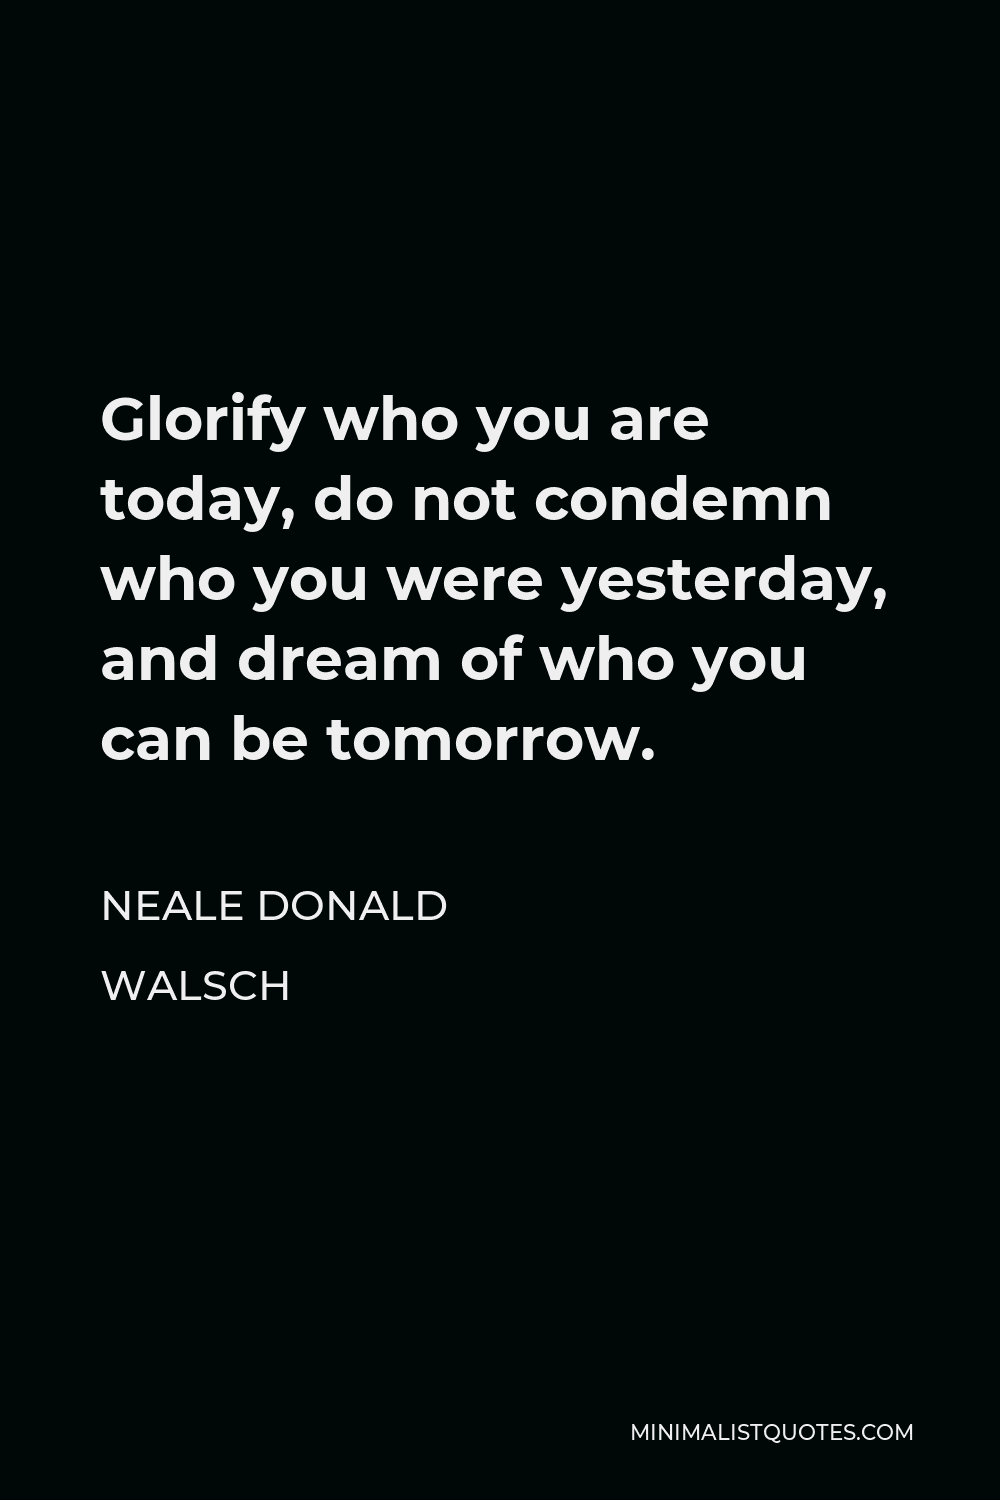 Neale Donald Walsch Quote - Glorify who you are today, do not condemn who you were yesterday, and dream of who you can be tomorrow.